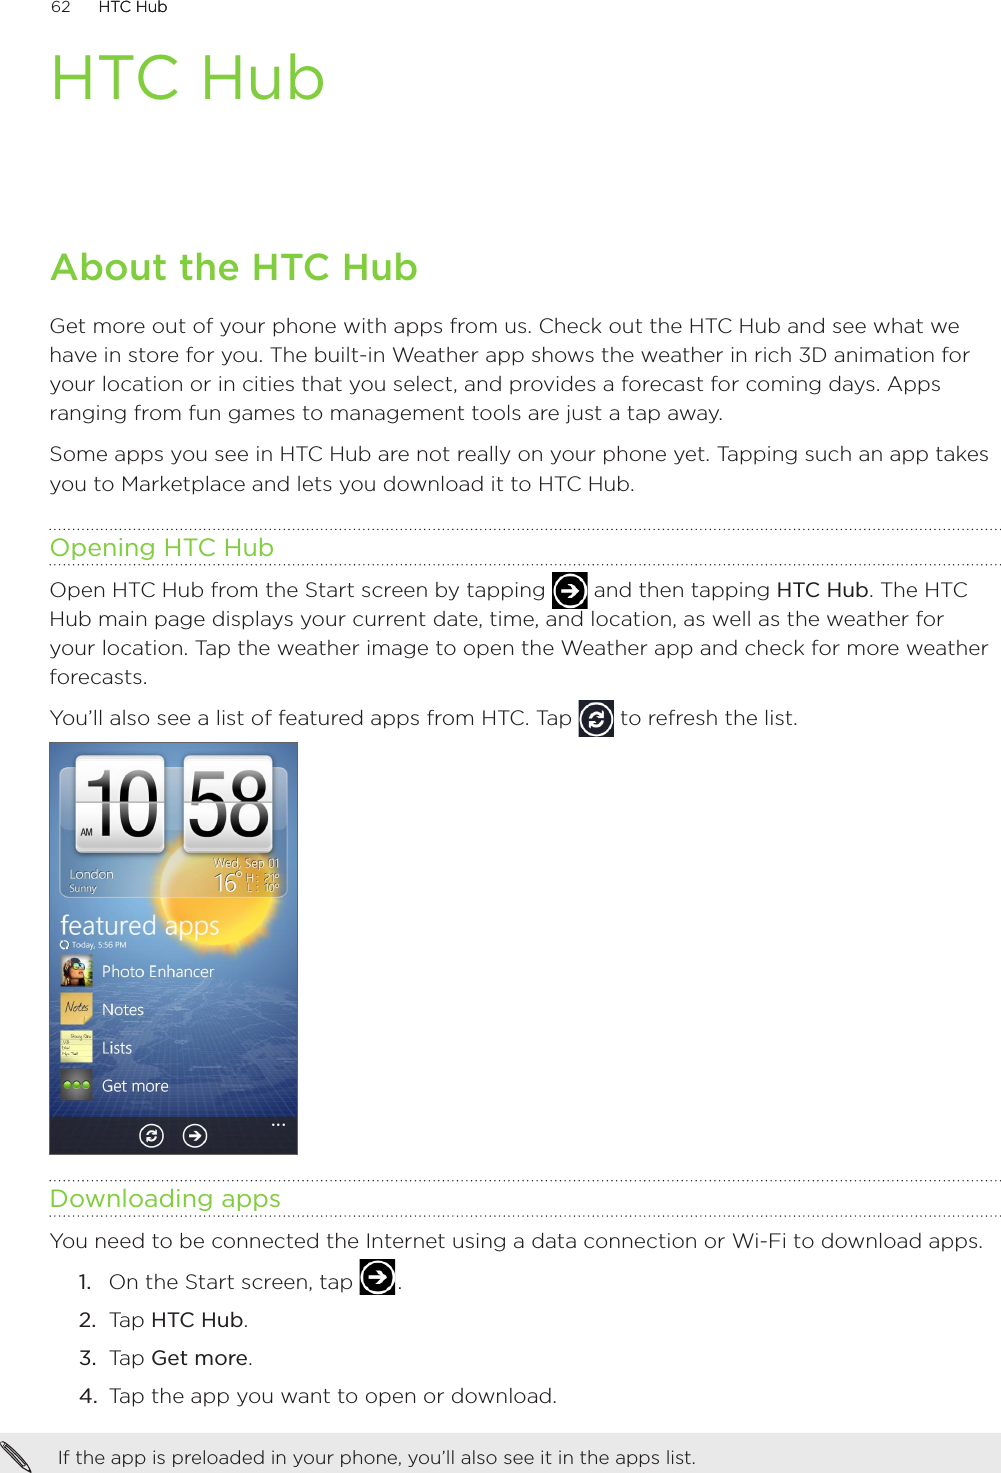 62      HTC HubHTC Hub      HTC HubAbout the HTC HubGet more out of your phone with apps from us. Check out the HTC Hub and see what we have in store for you. The built-in Weather app shows the weather in rich 3D animation for your location or in cities that you select, and provides a forecast for coming days. Apps ranging from fun games to management tools are just a tap away. Some apps you see in HTC Hub are not really on your phone yet. Tapping such an app takes you to Marketplace and lets you download it to HTC Hub.  Opening HTC HubOpen HTC Hub from the Start screen by tapping   and then tapping HTC Hub. The HTC Hub main page displays your current date, time, and location, as well as the weather for your location. Tap the weather image to open the Weather app and check for more weather forecasts.You’ll also see a list of featured apps from HTC. Tap   to refresh the list.Downloading appsYou need to be connected the Internet using a data connection or Wi-Fi to download apps.On the Start screen, tap   .Tap HTC Hub. Tap Get more.Tap the app you want to open or download.If the app is preloaded in your phone, you’ll also see it in the apps list. 1.2.3.4.